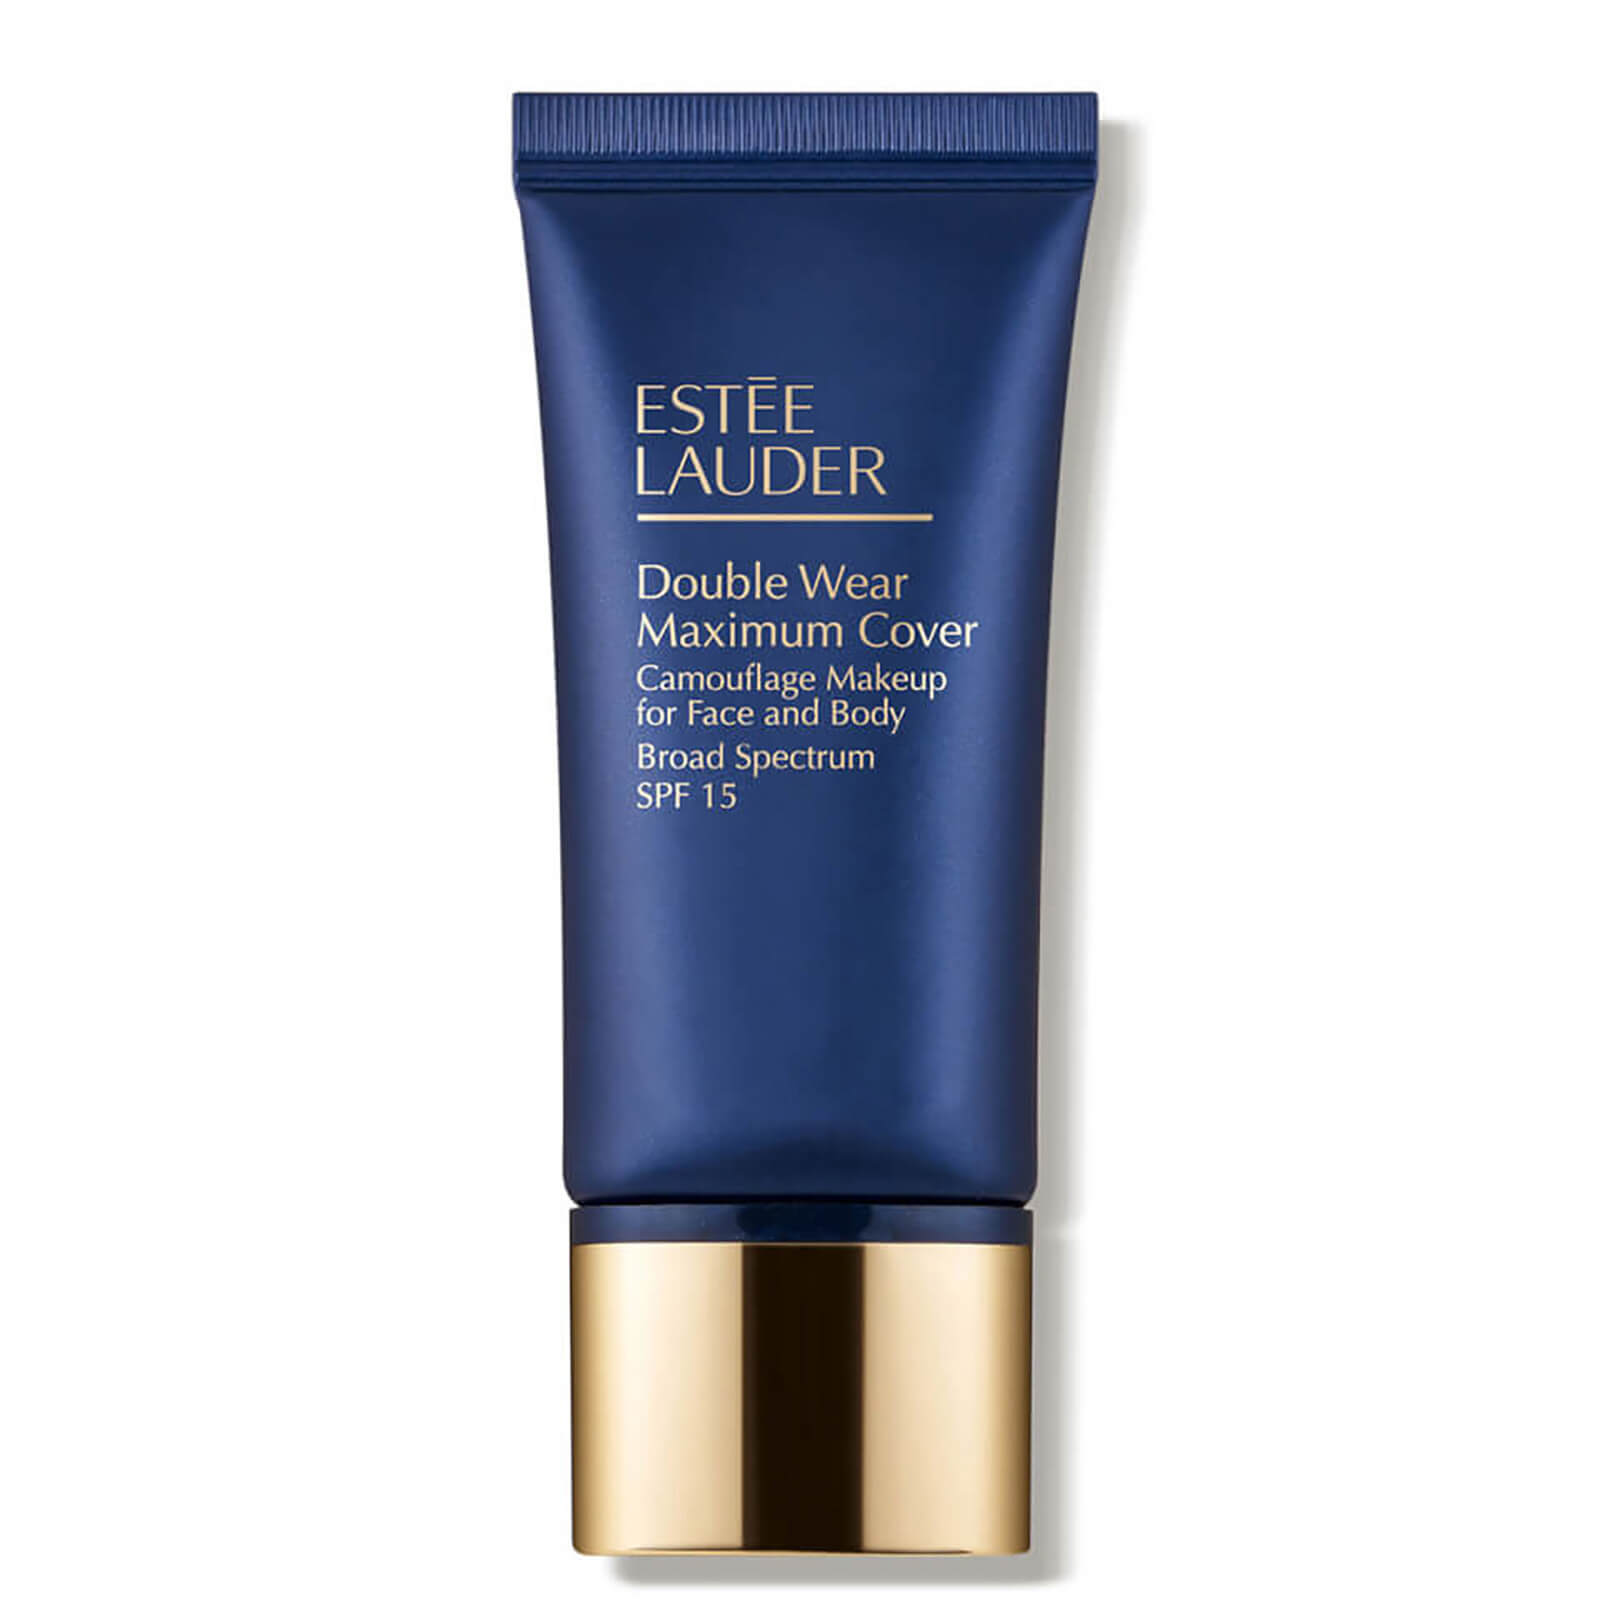 Estee Lauder Double Wear Maximum Cover Camouflage Makeup for Face and Body SPF15 30ml - 2W1 Dawn